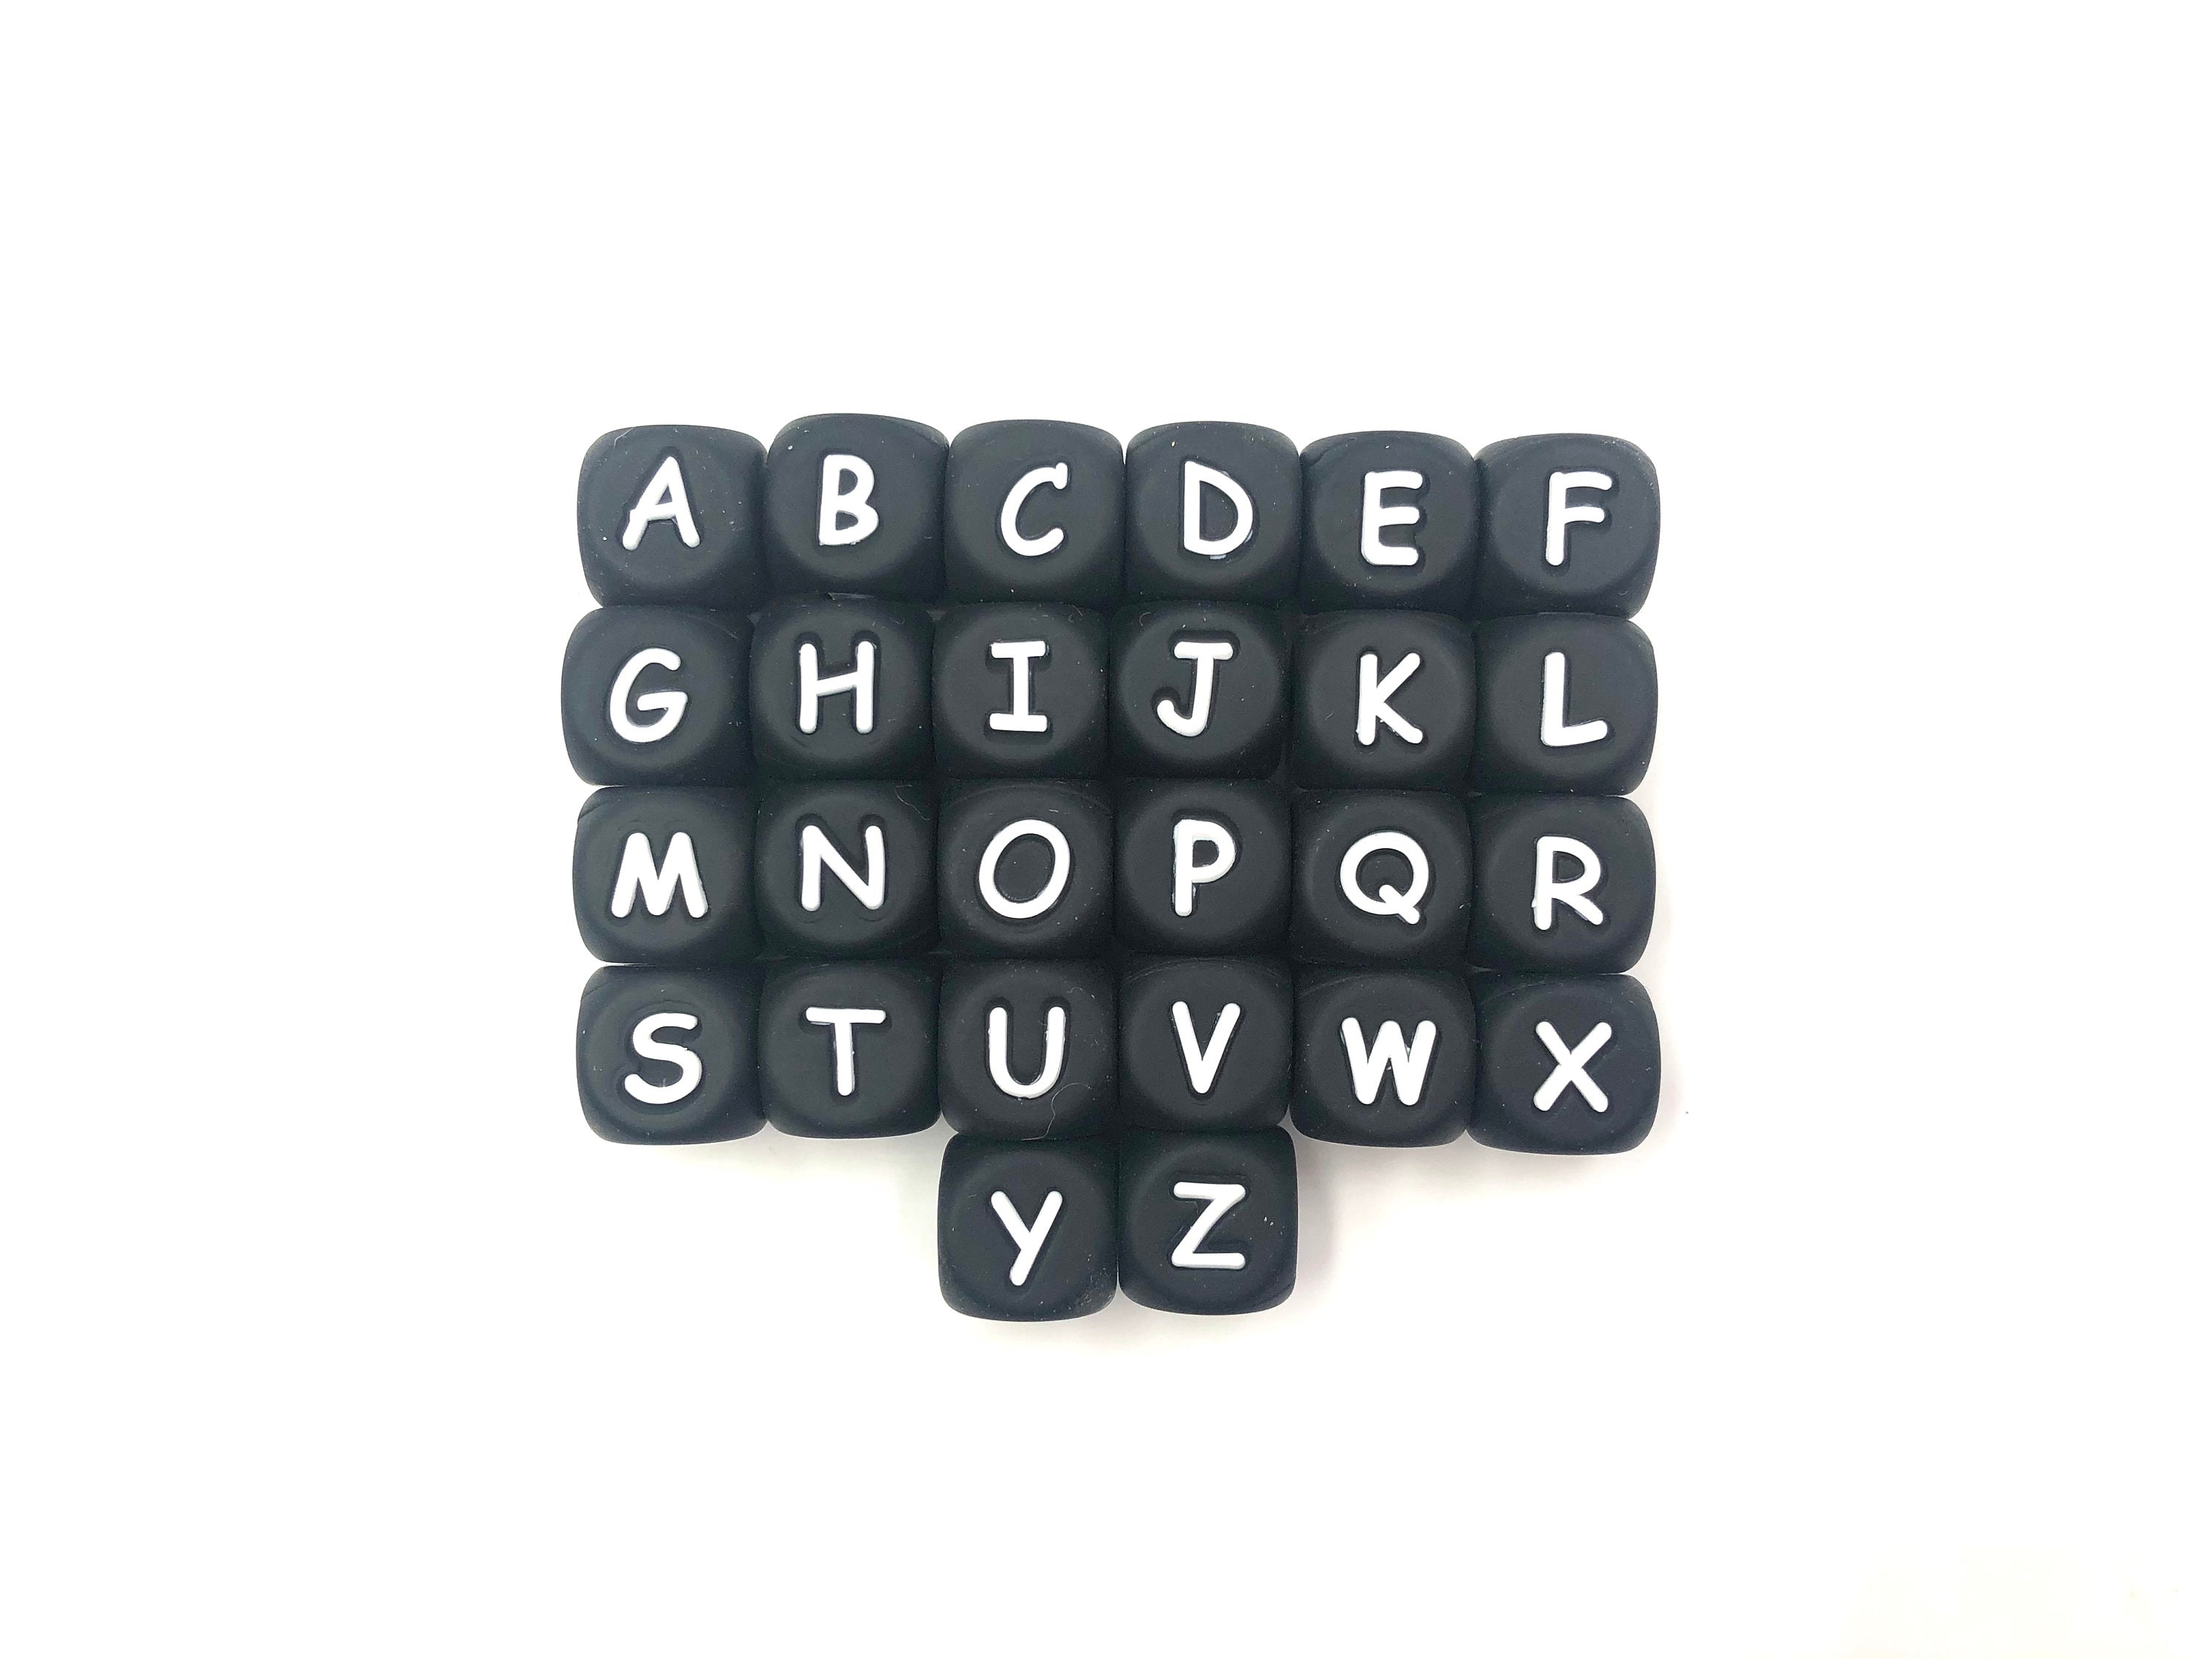 BULK ORDER (100 pcs and up) 12mm Silicone Letter Beads Food Grade